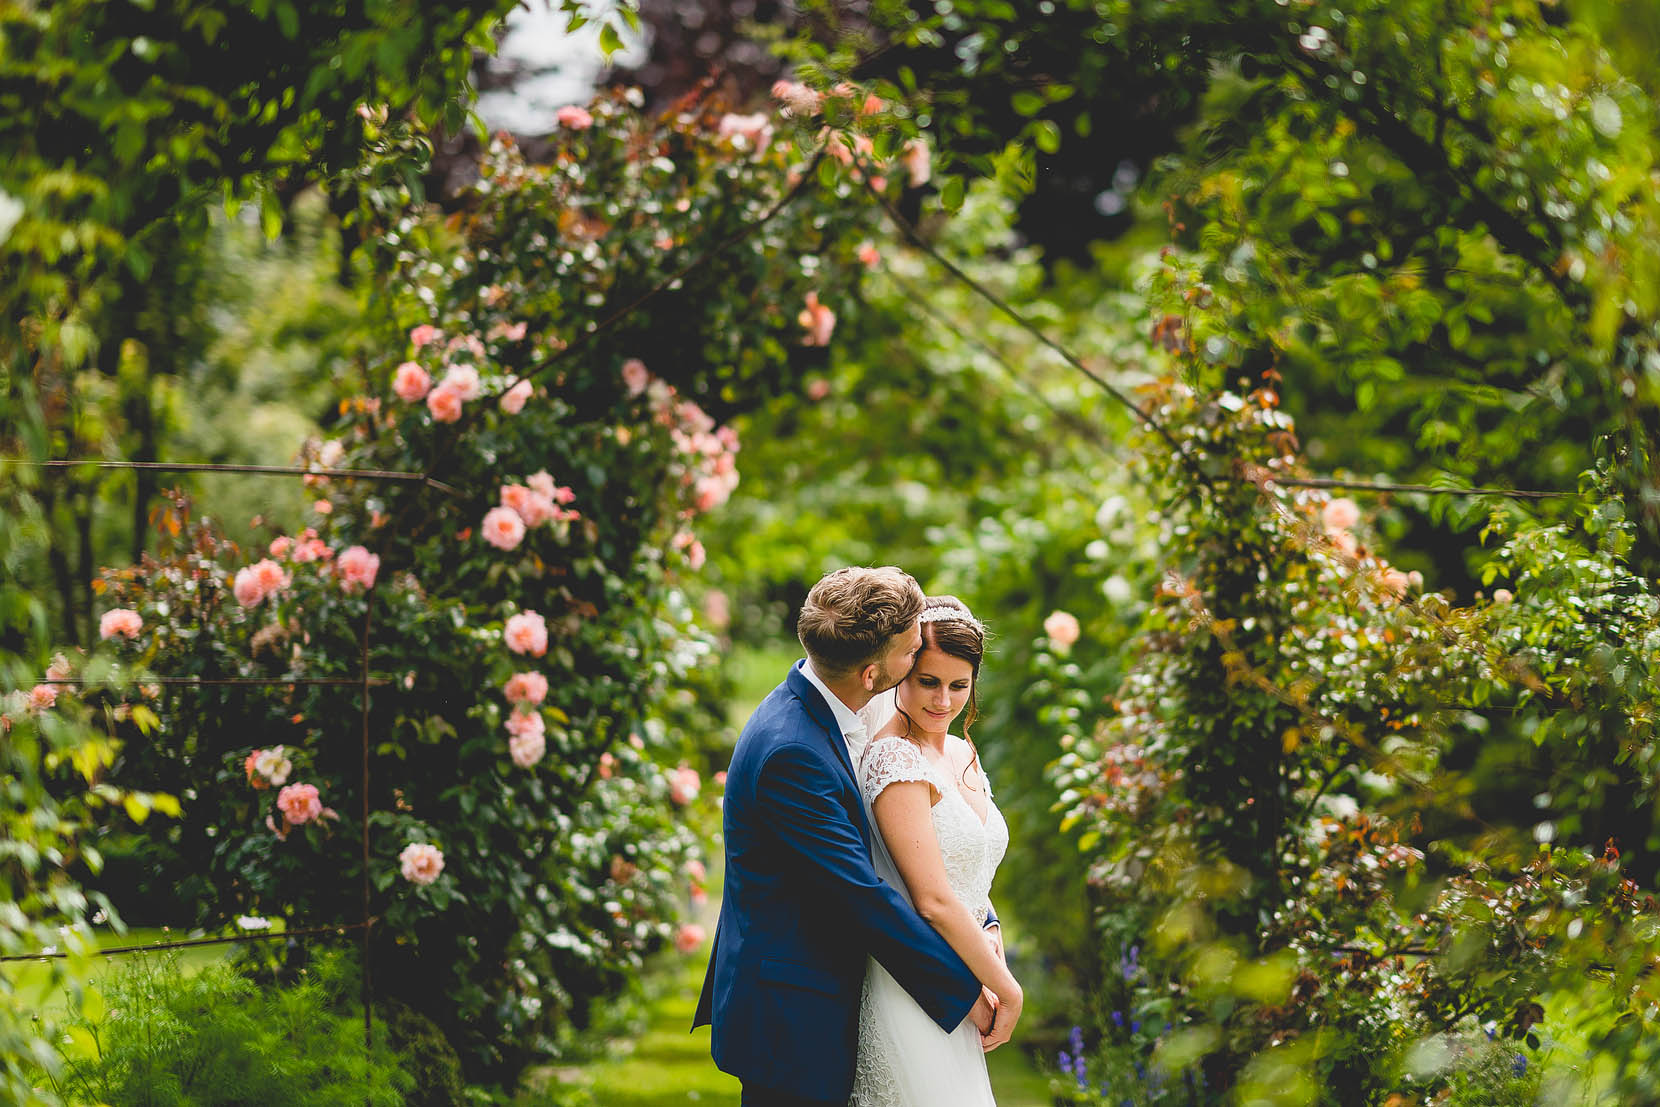 Norfolk Wedding at Elms barn with Jess and Adam having a cuddle in the rose arch